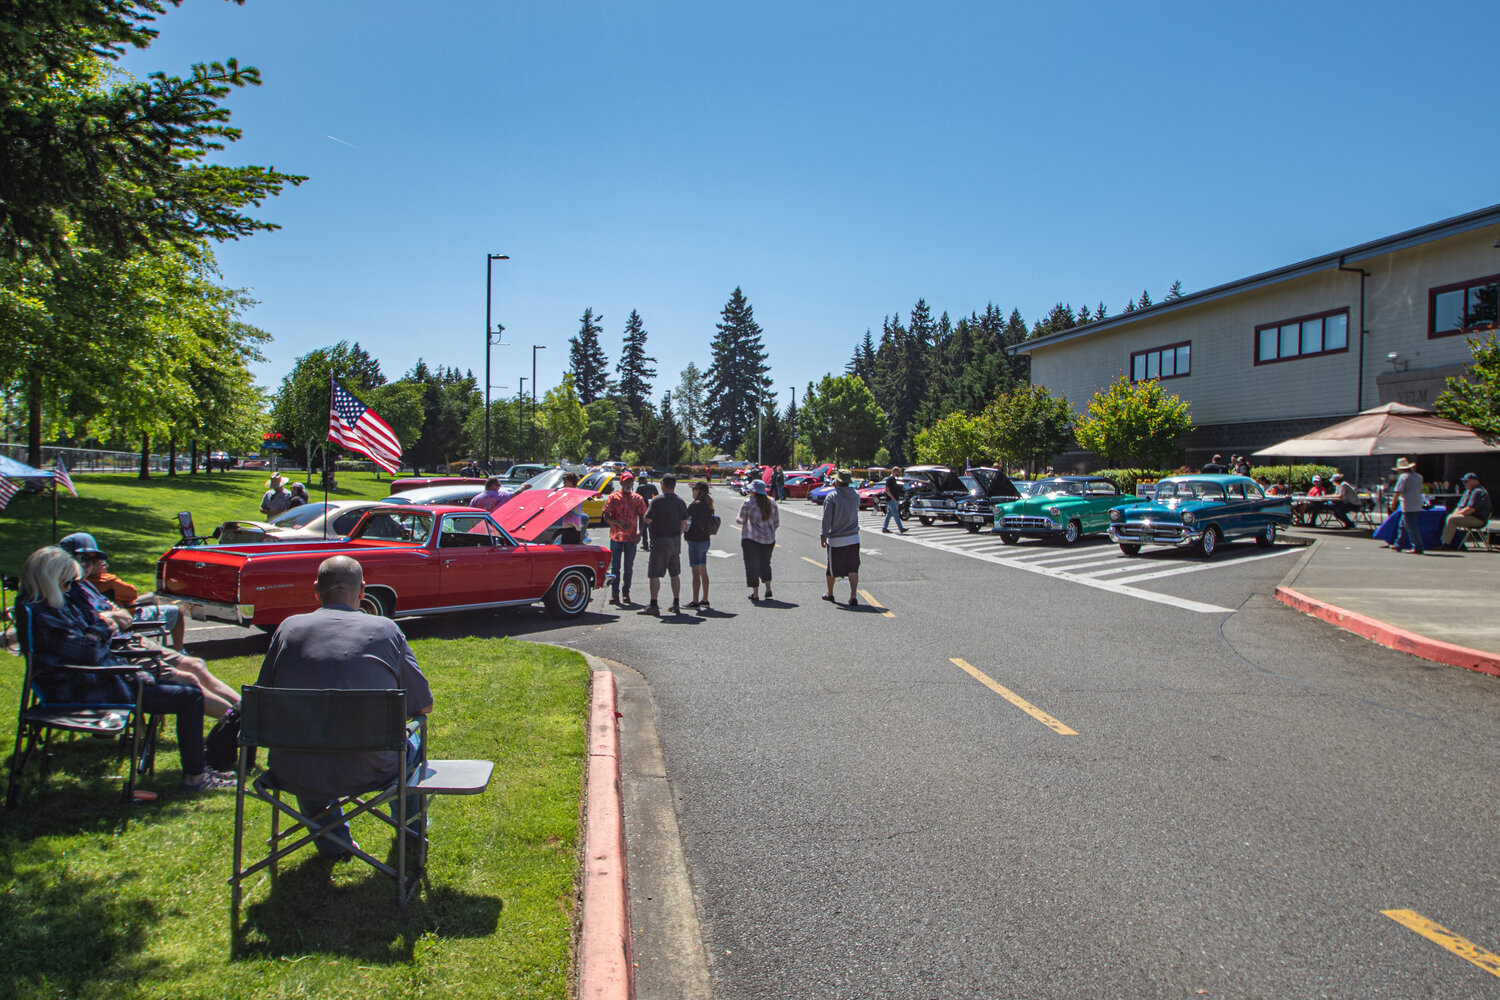 Residents from Yelm and the surrounding communities gathered at Yelm High School on Sunday, June 4, for a car show.